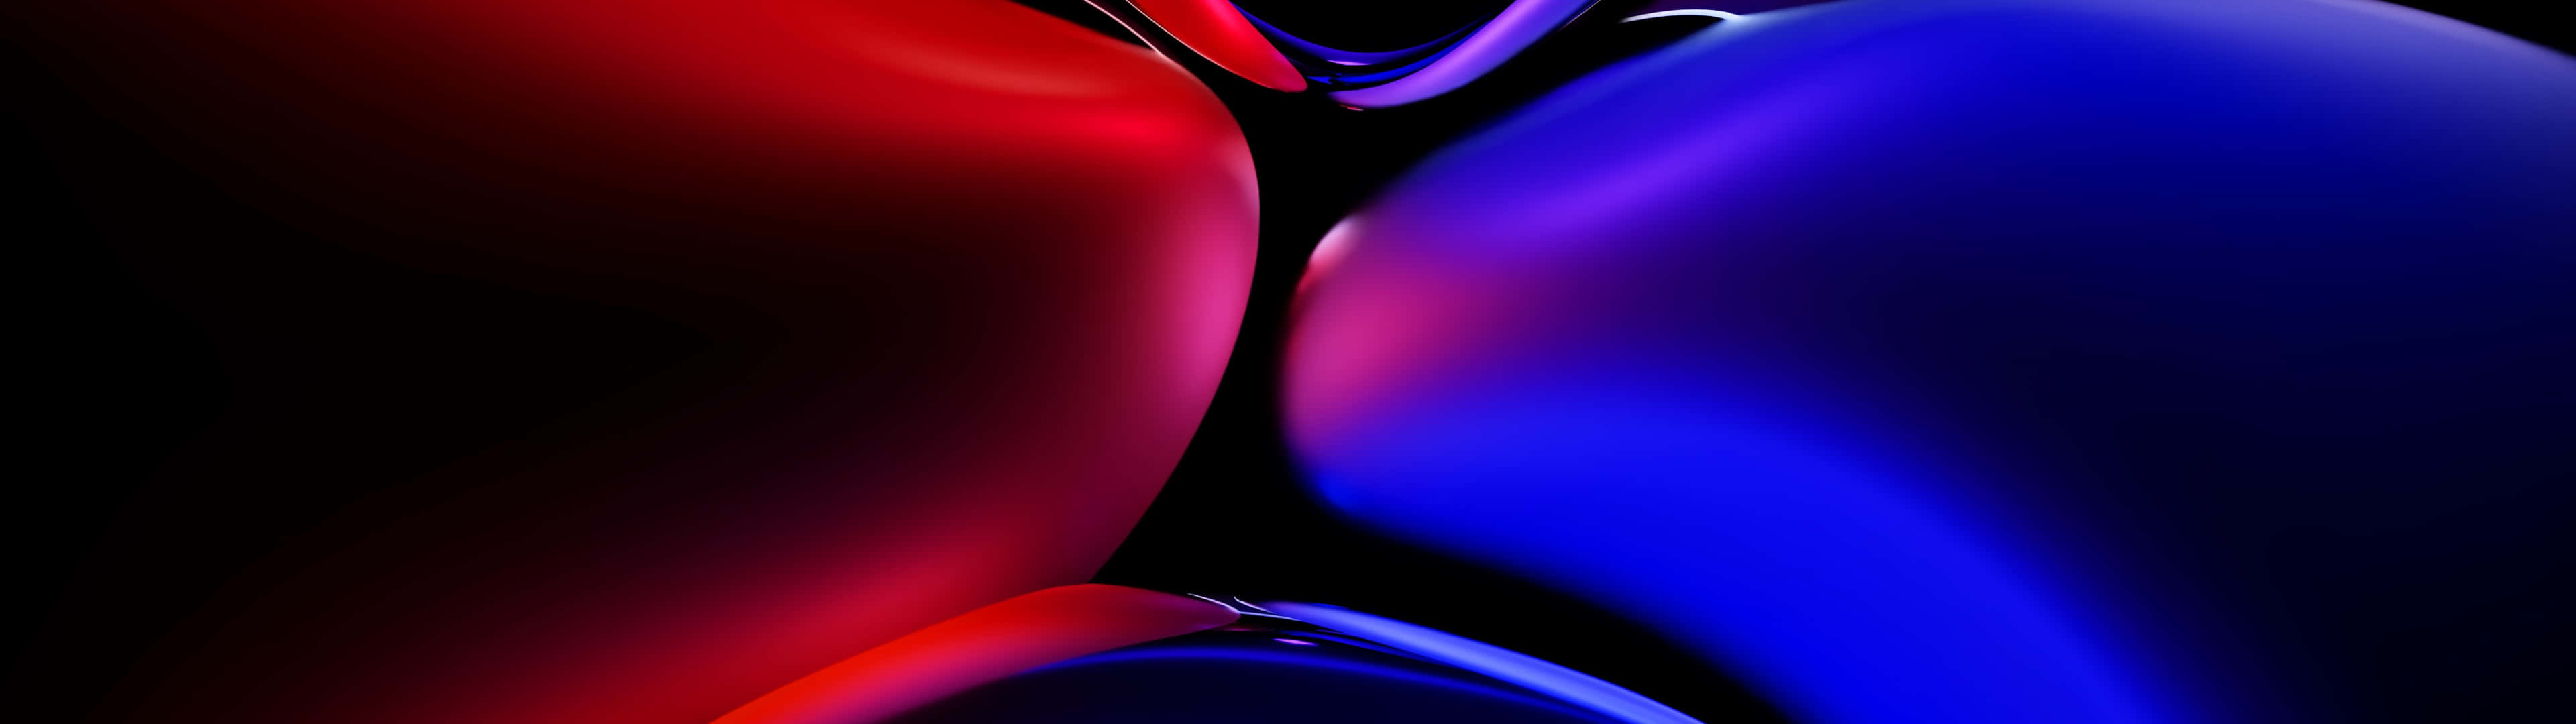 A Blue And Red Abstract Image With A Black Background